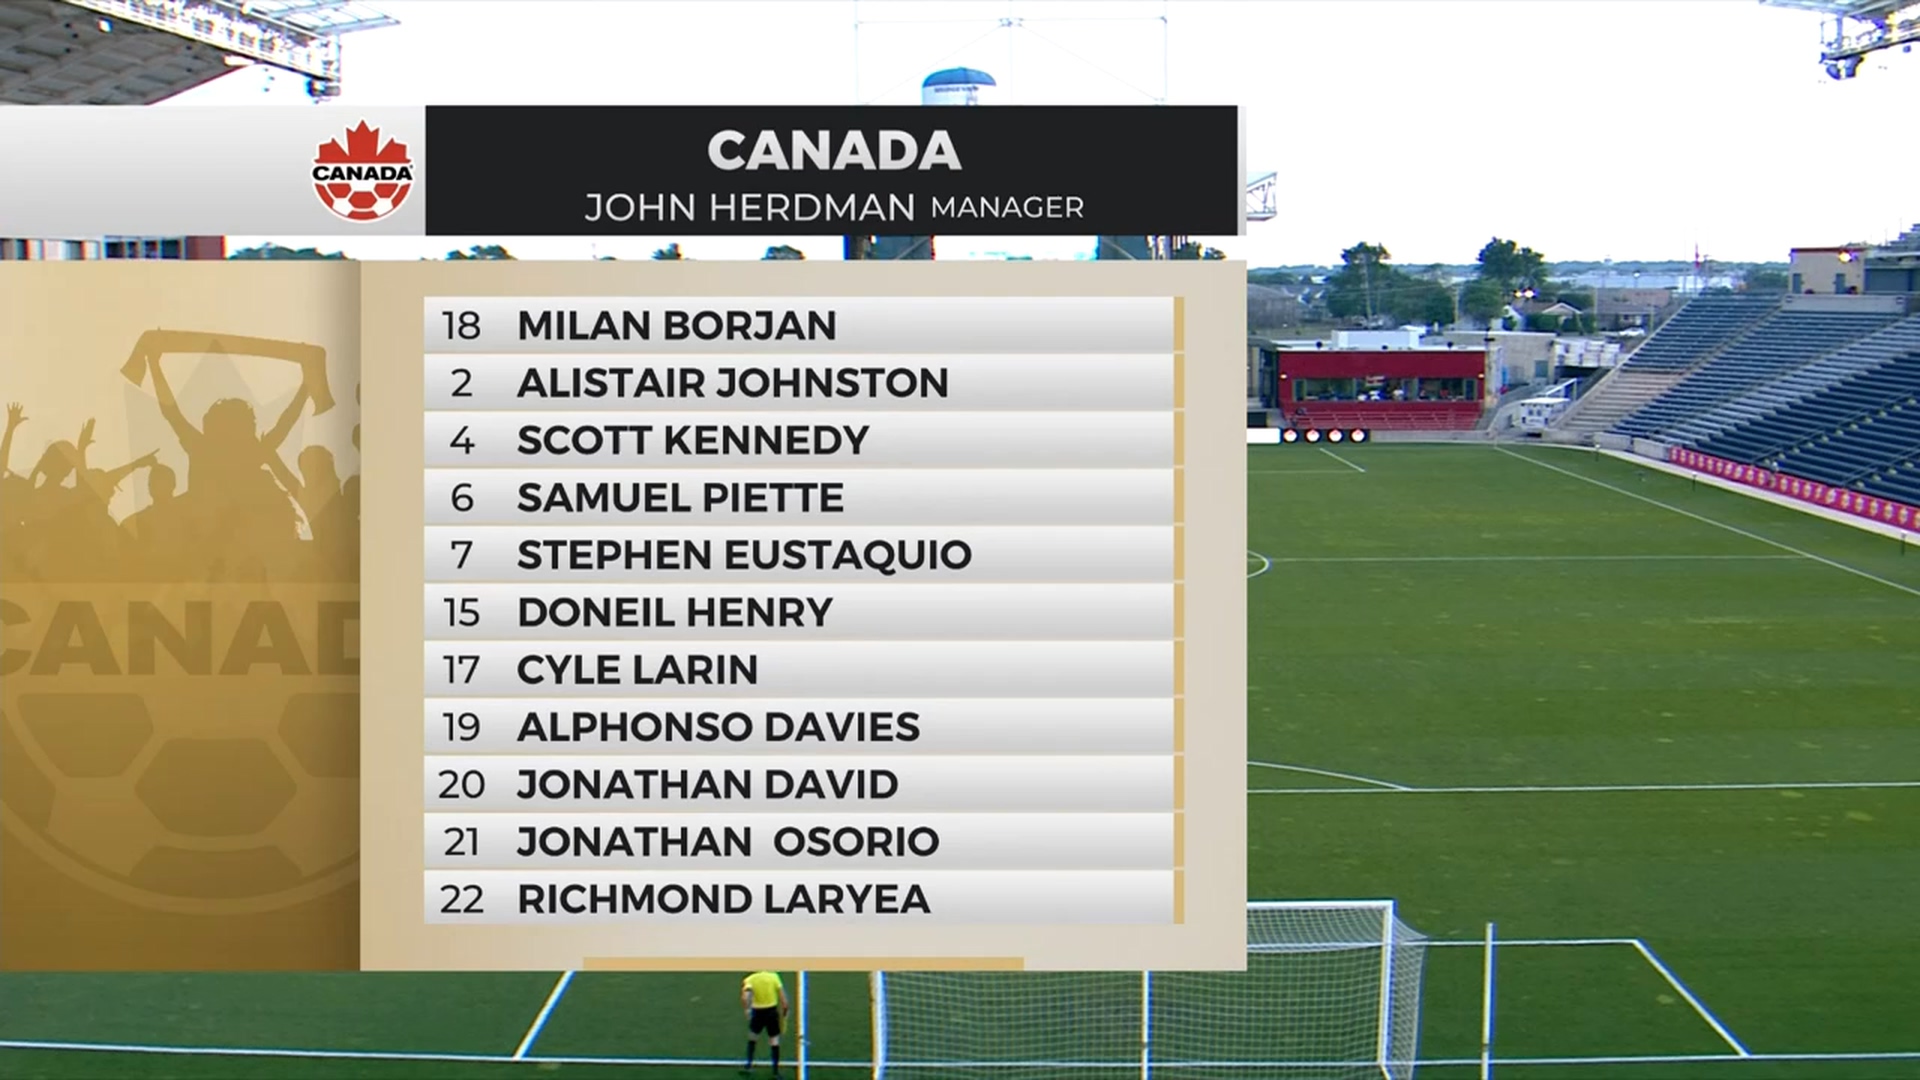 World Cup 2022 Qualifiers - Canada vs Suriname - 08/06/2021